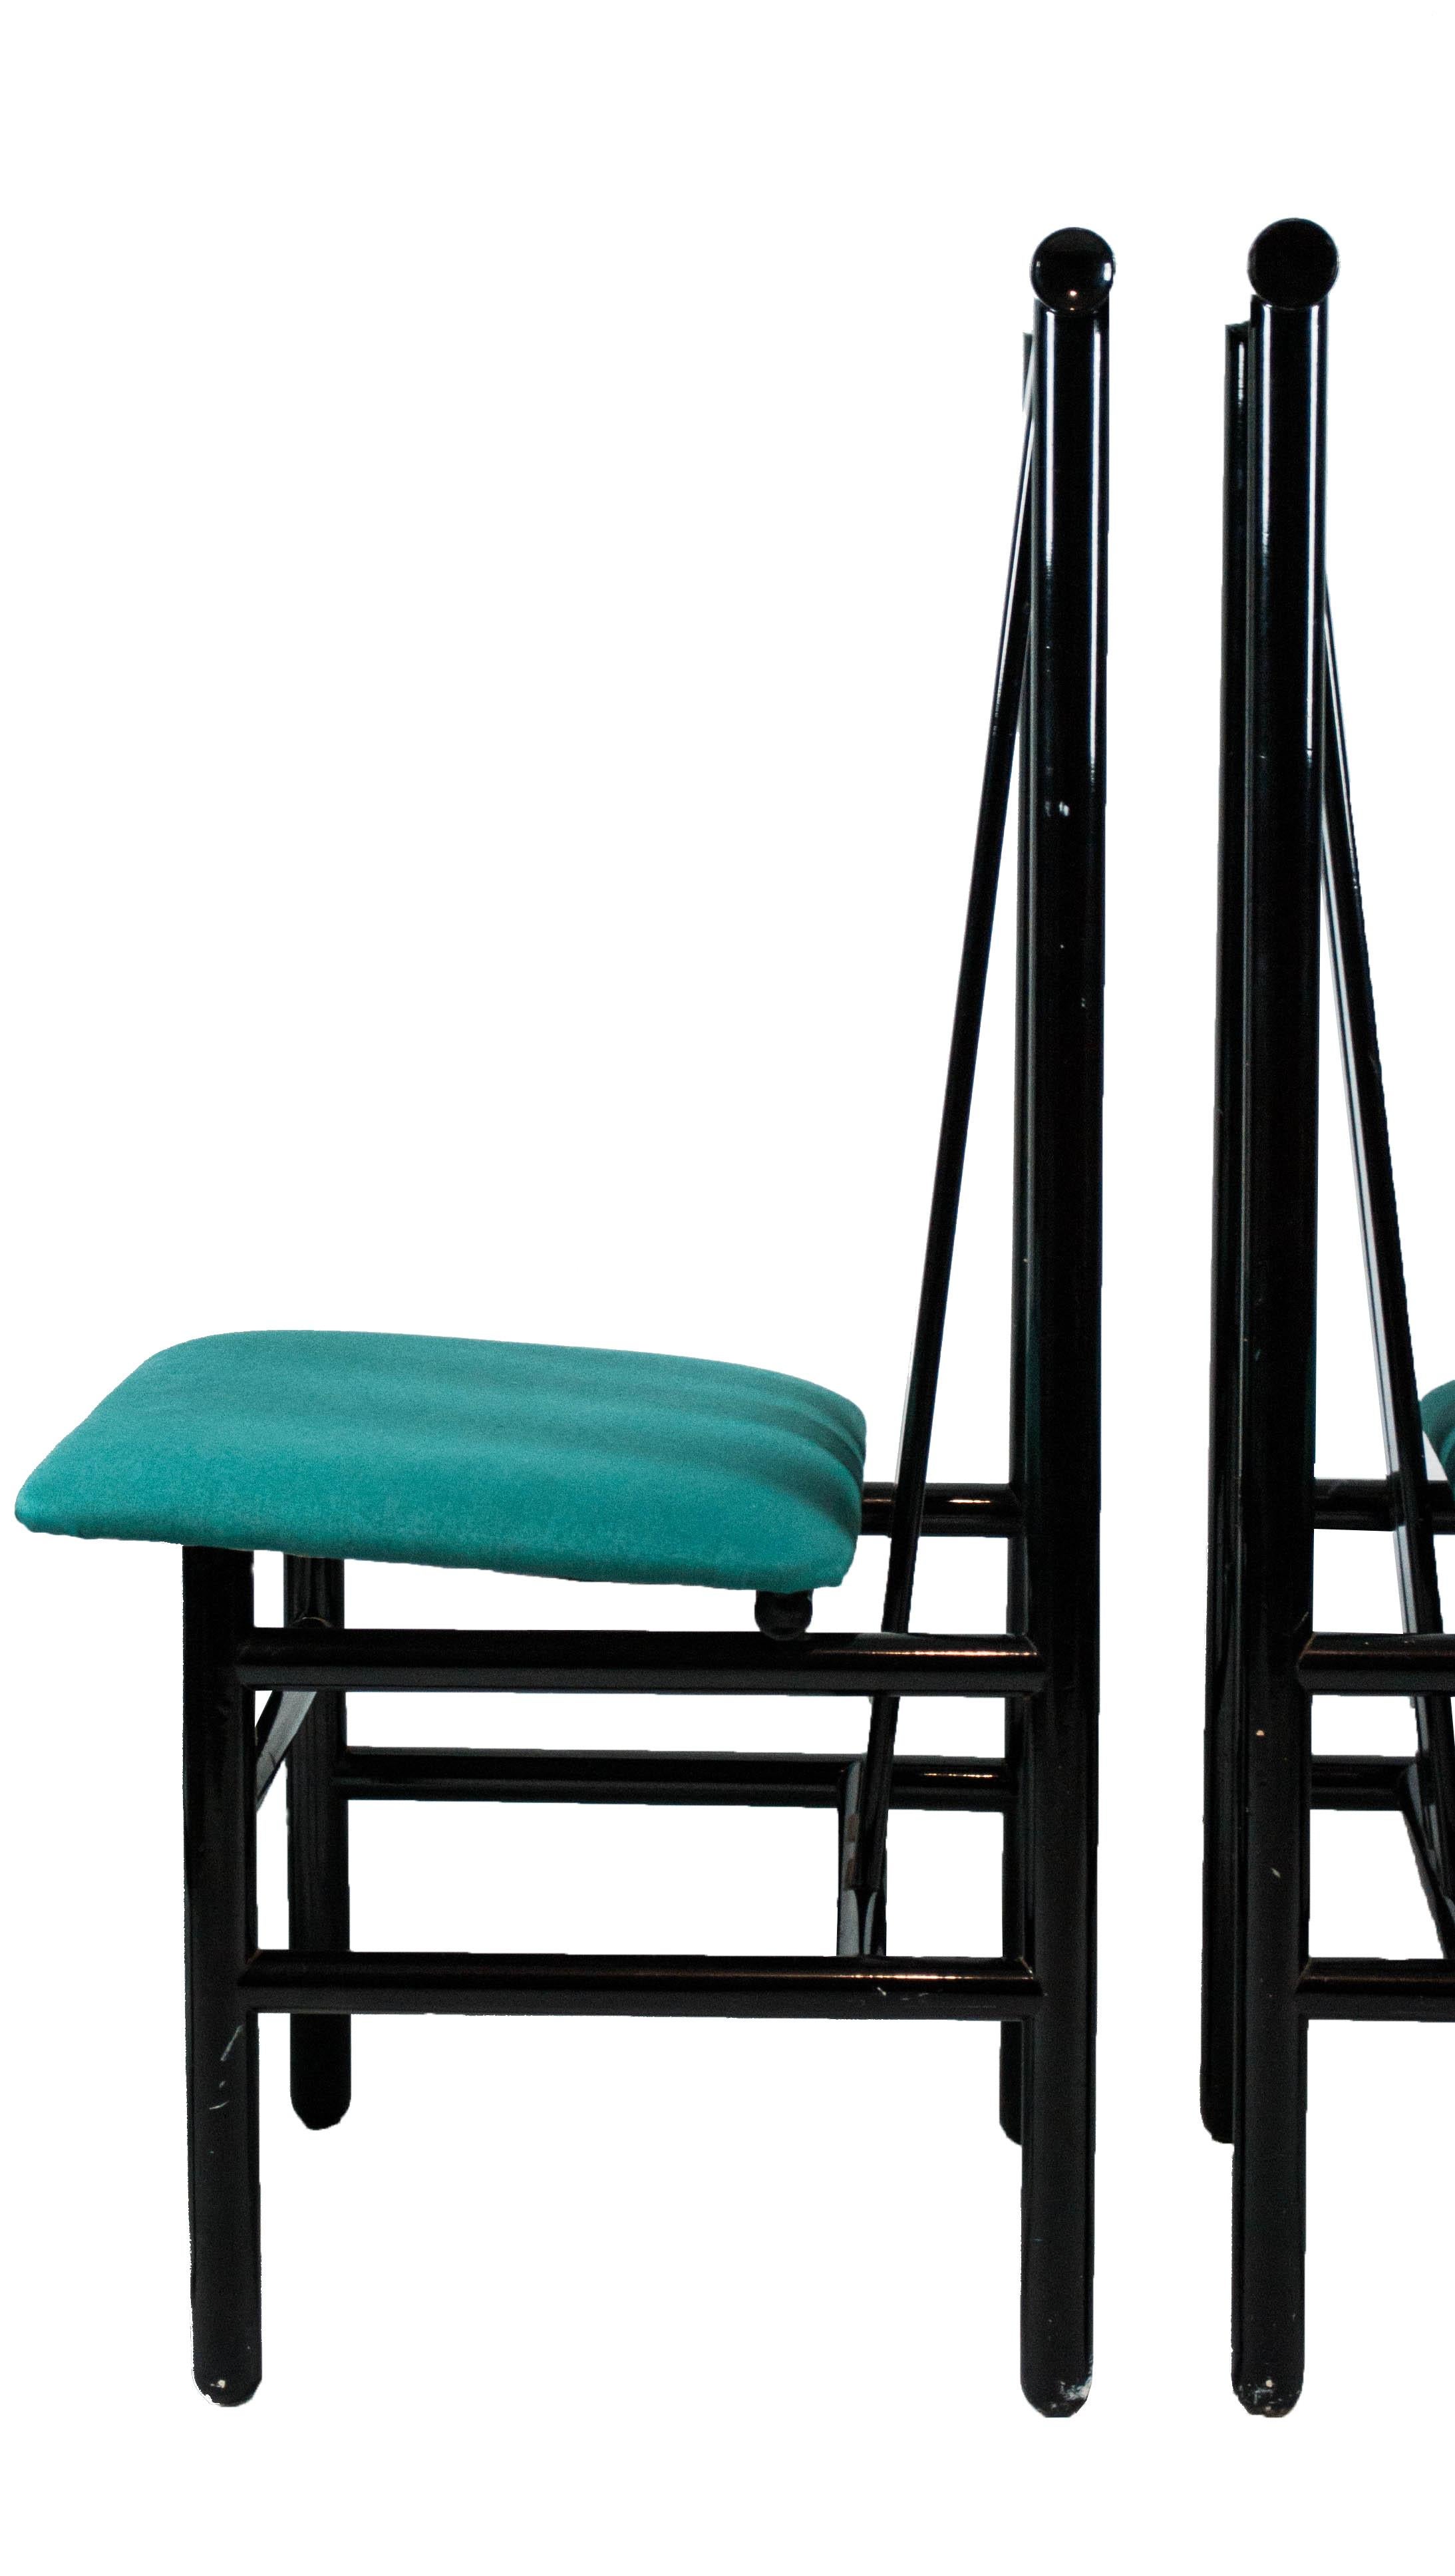 Set of four high-backed Zea chairs in lacquered black wood by Annig Sarian, made in Italy in 1981 for Tisettanta.
The peculiar inclined backrest makes this model an icon of the 1980s Italian design. The seats are reupholstered in cotton